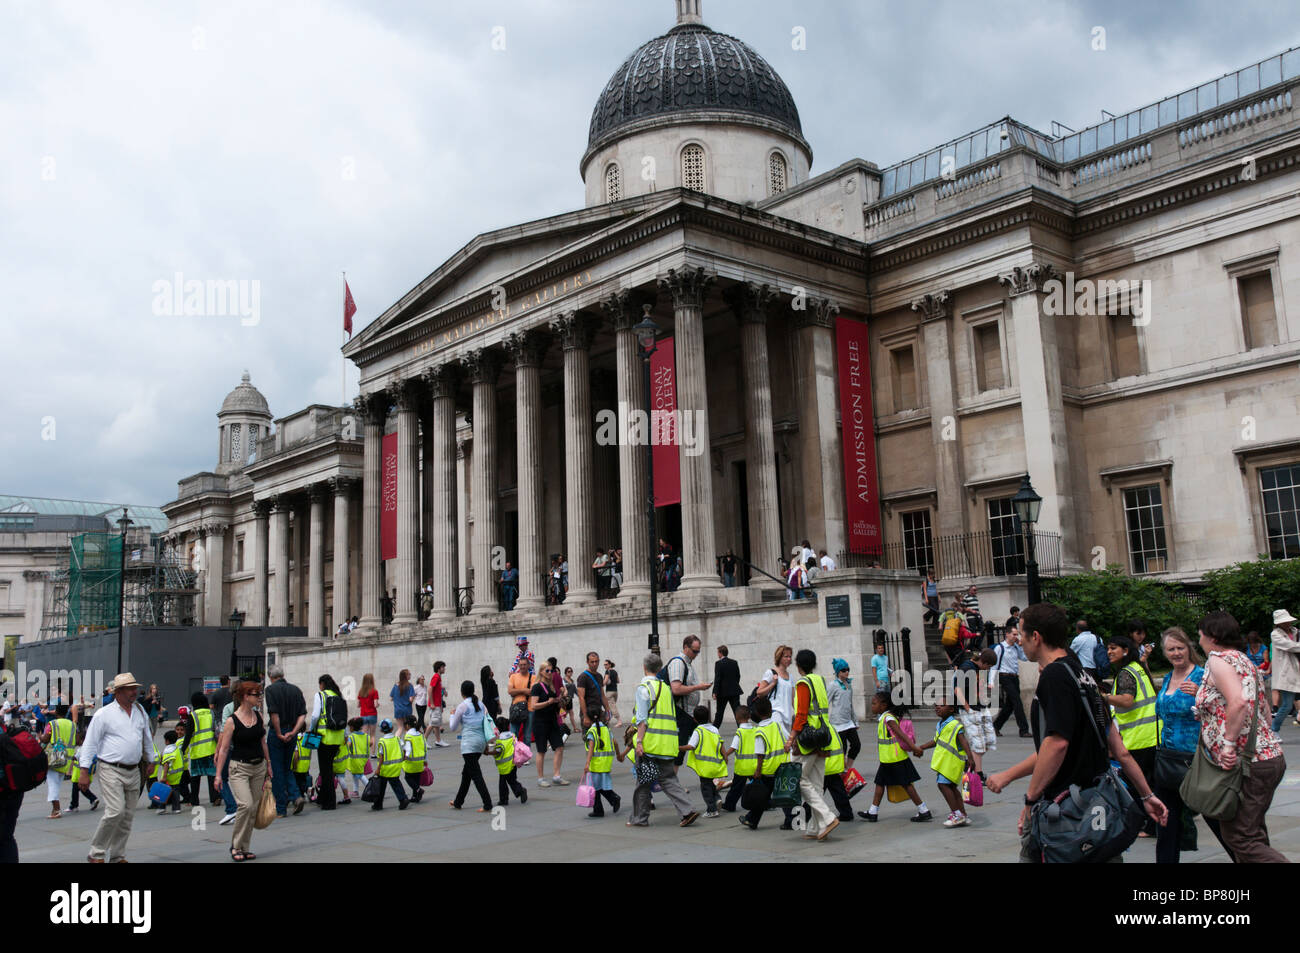 A group of school children on an outing cross Trafalgar Square in London wearing high-vis jackets Stock Photo